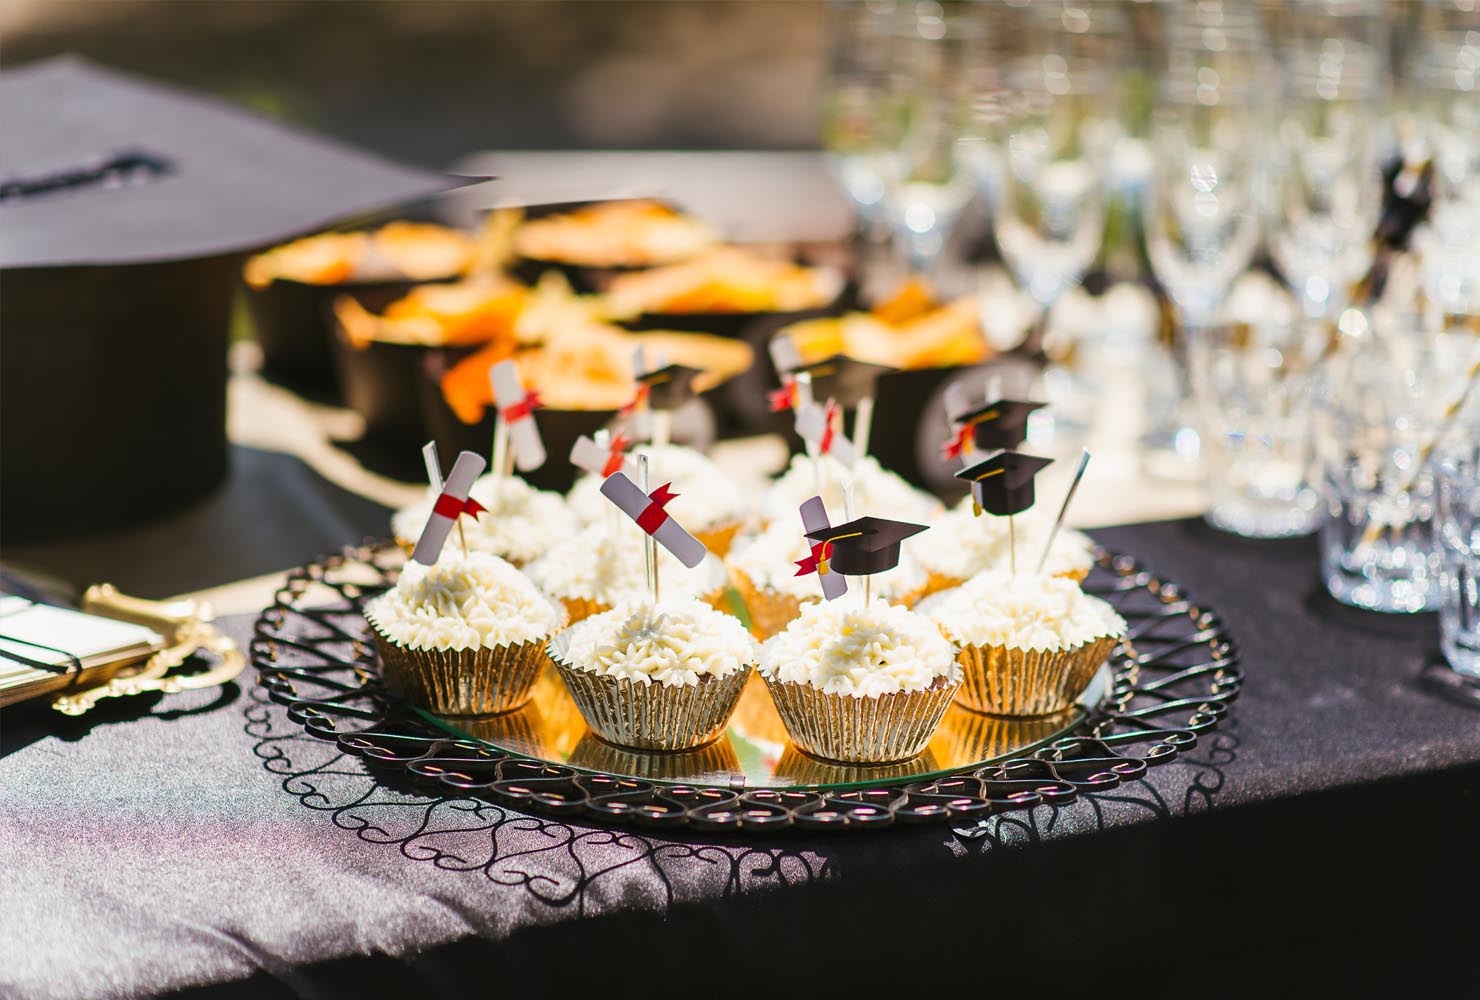 Graduation decor and white cupcakes with mini caps and gowns